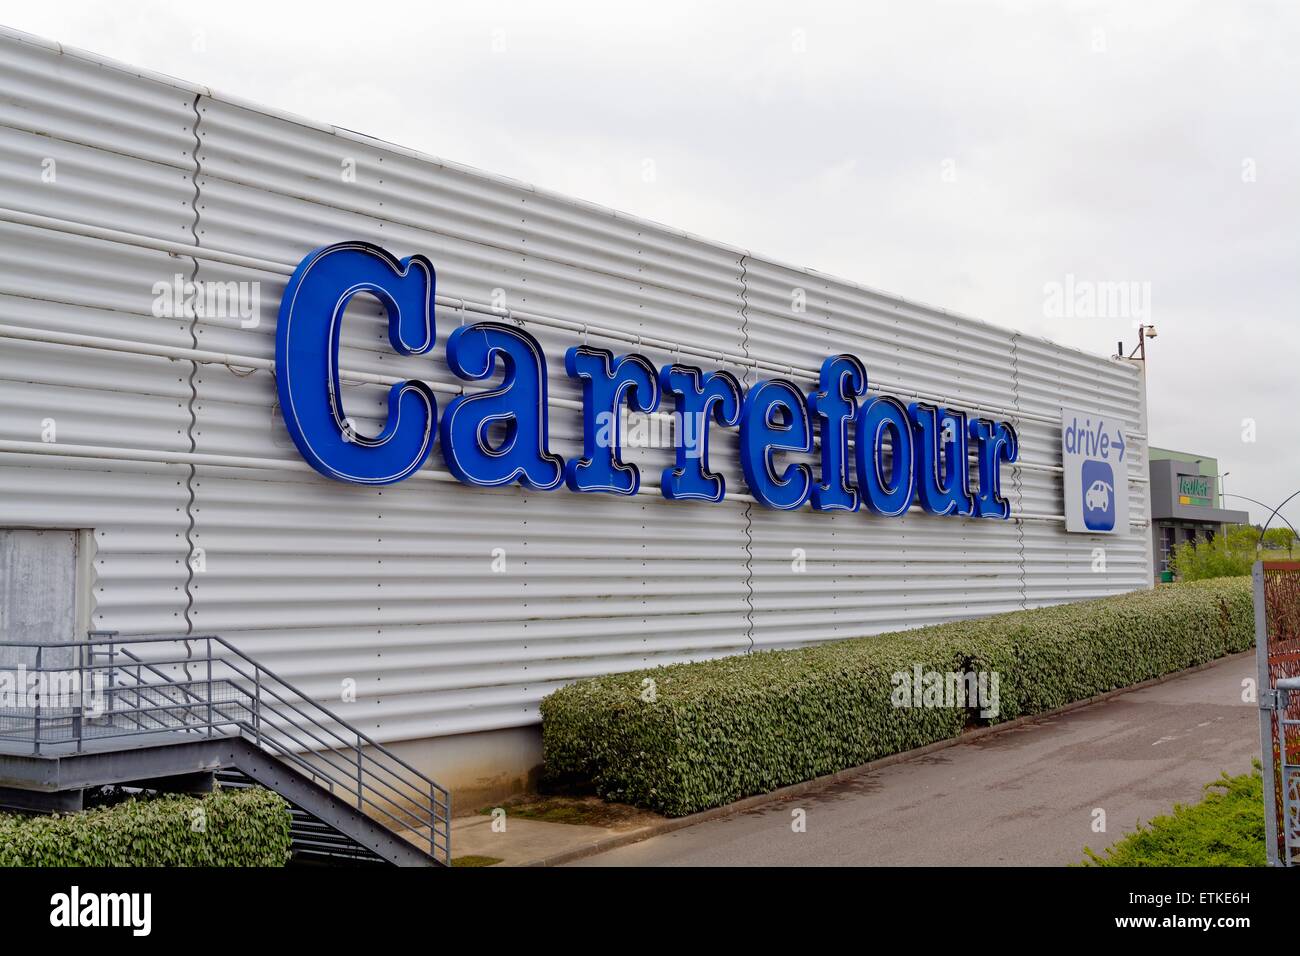 Carrefour logo on store in Citi Europe Calais France Stock Photo